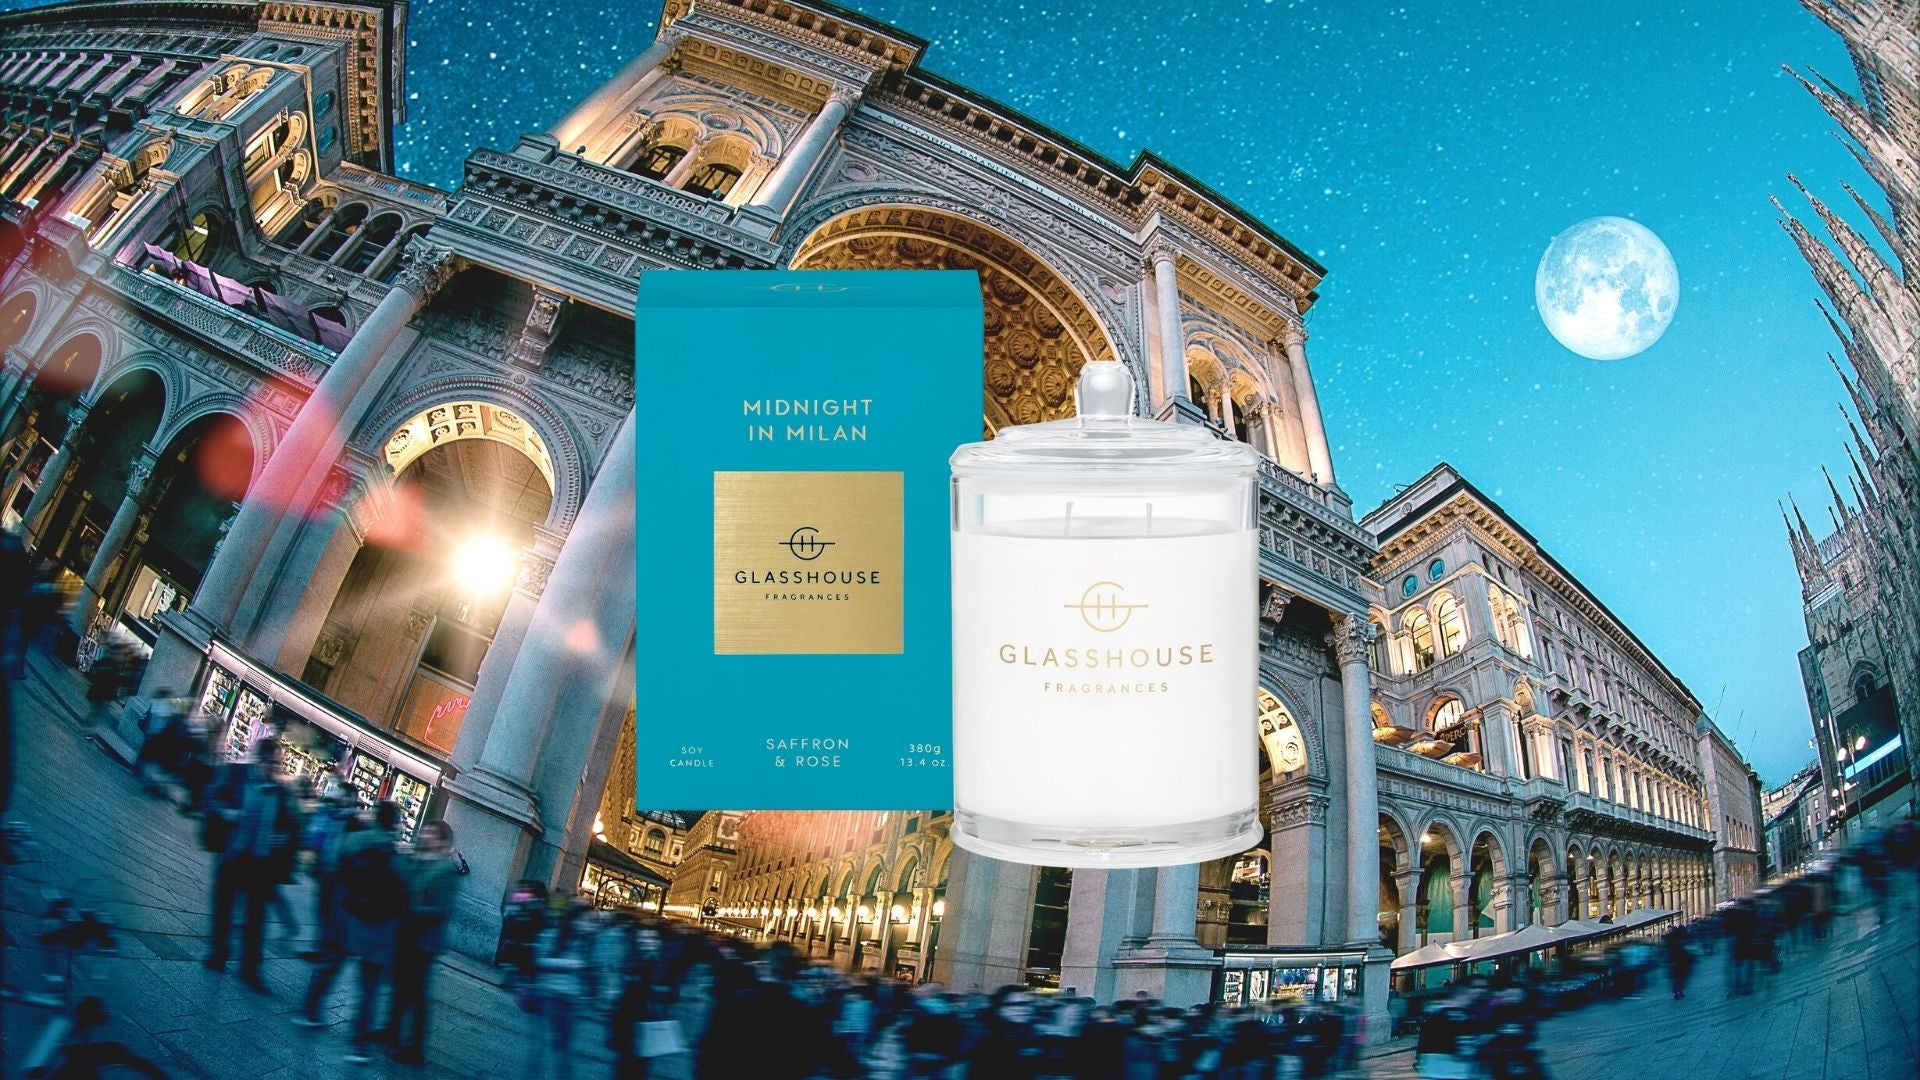 Glasshouse candle Midnight in Milan